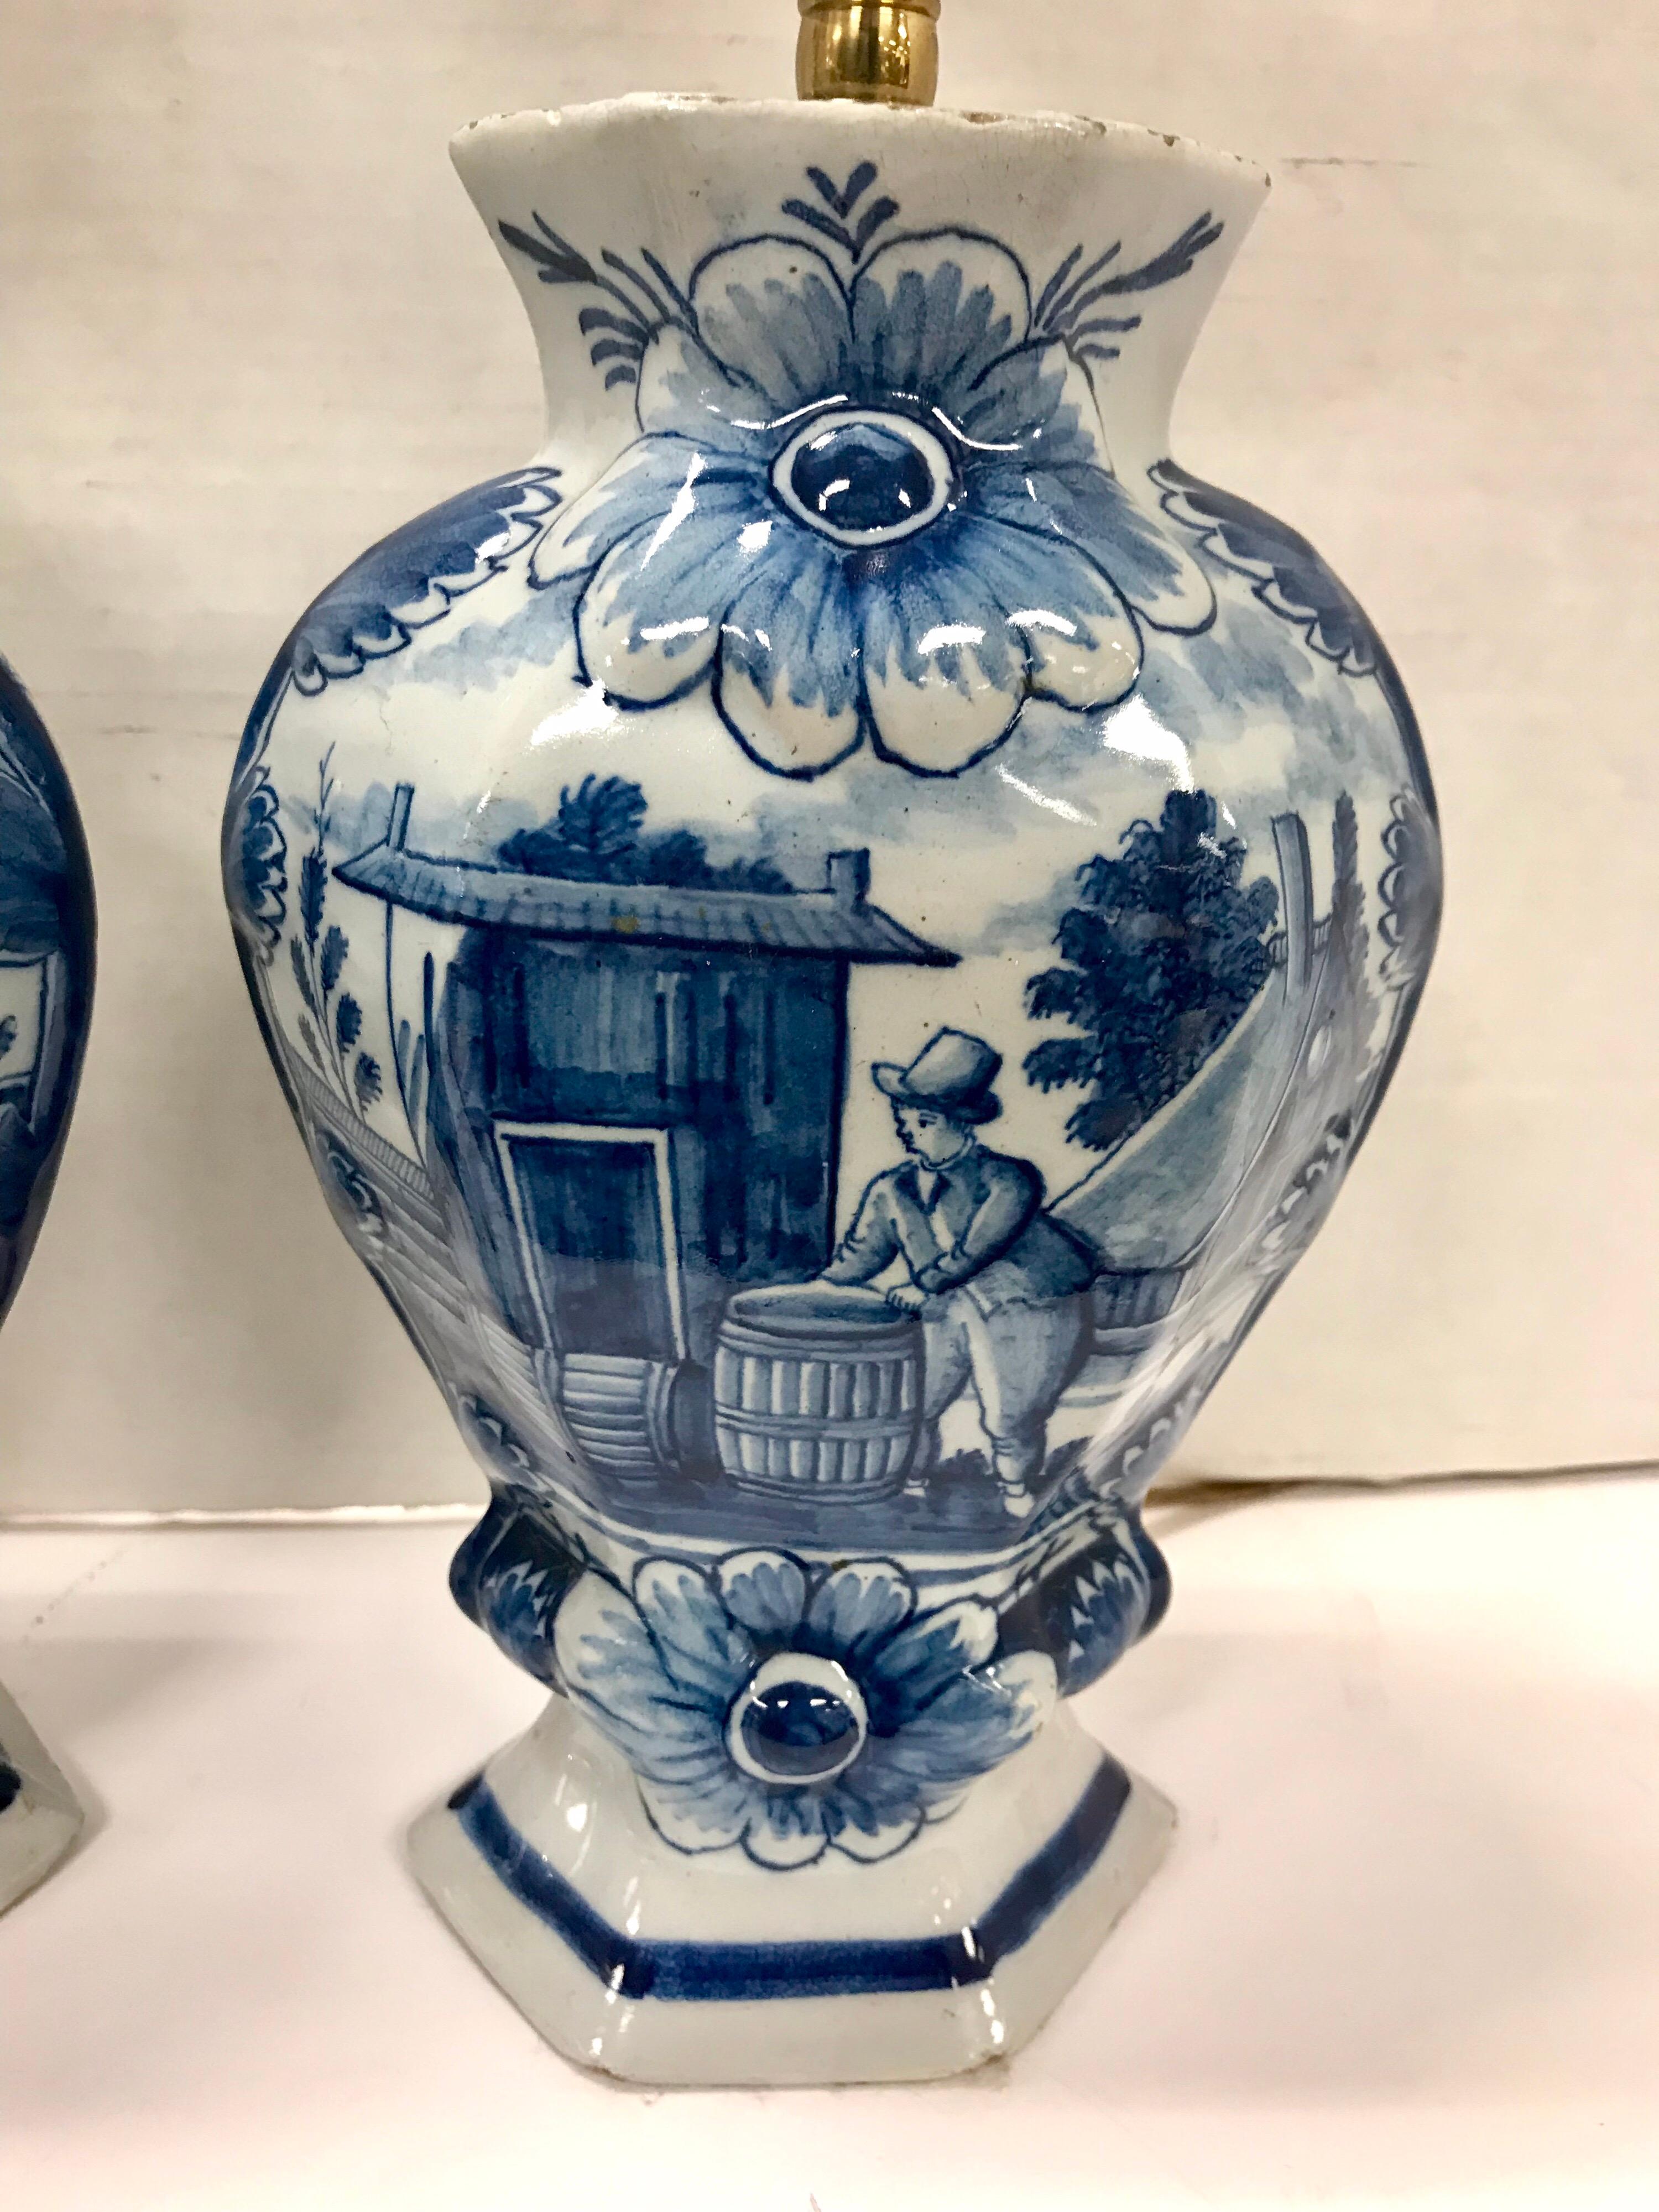 Beautiful pair of matching Delft blue and white vases turned into table lamps. Each fitted for two bulbs. Wired and in working condition. The base has felt protector.